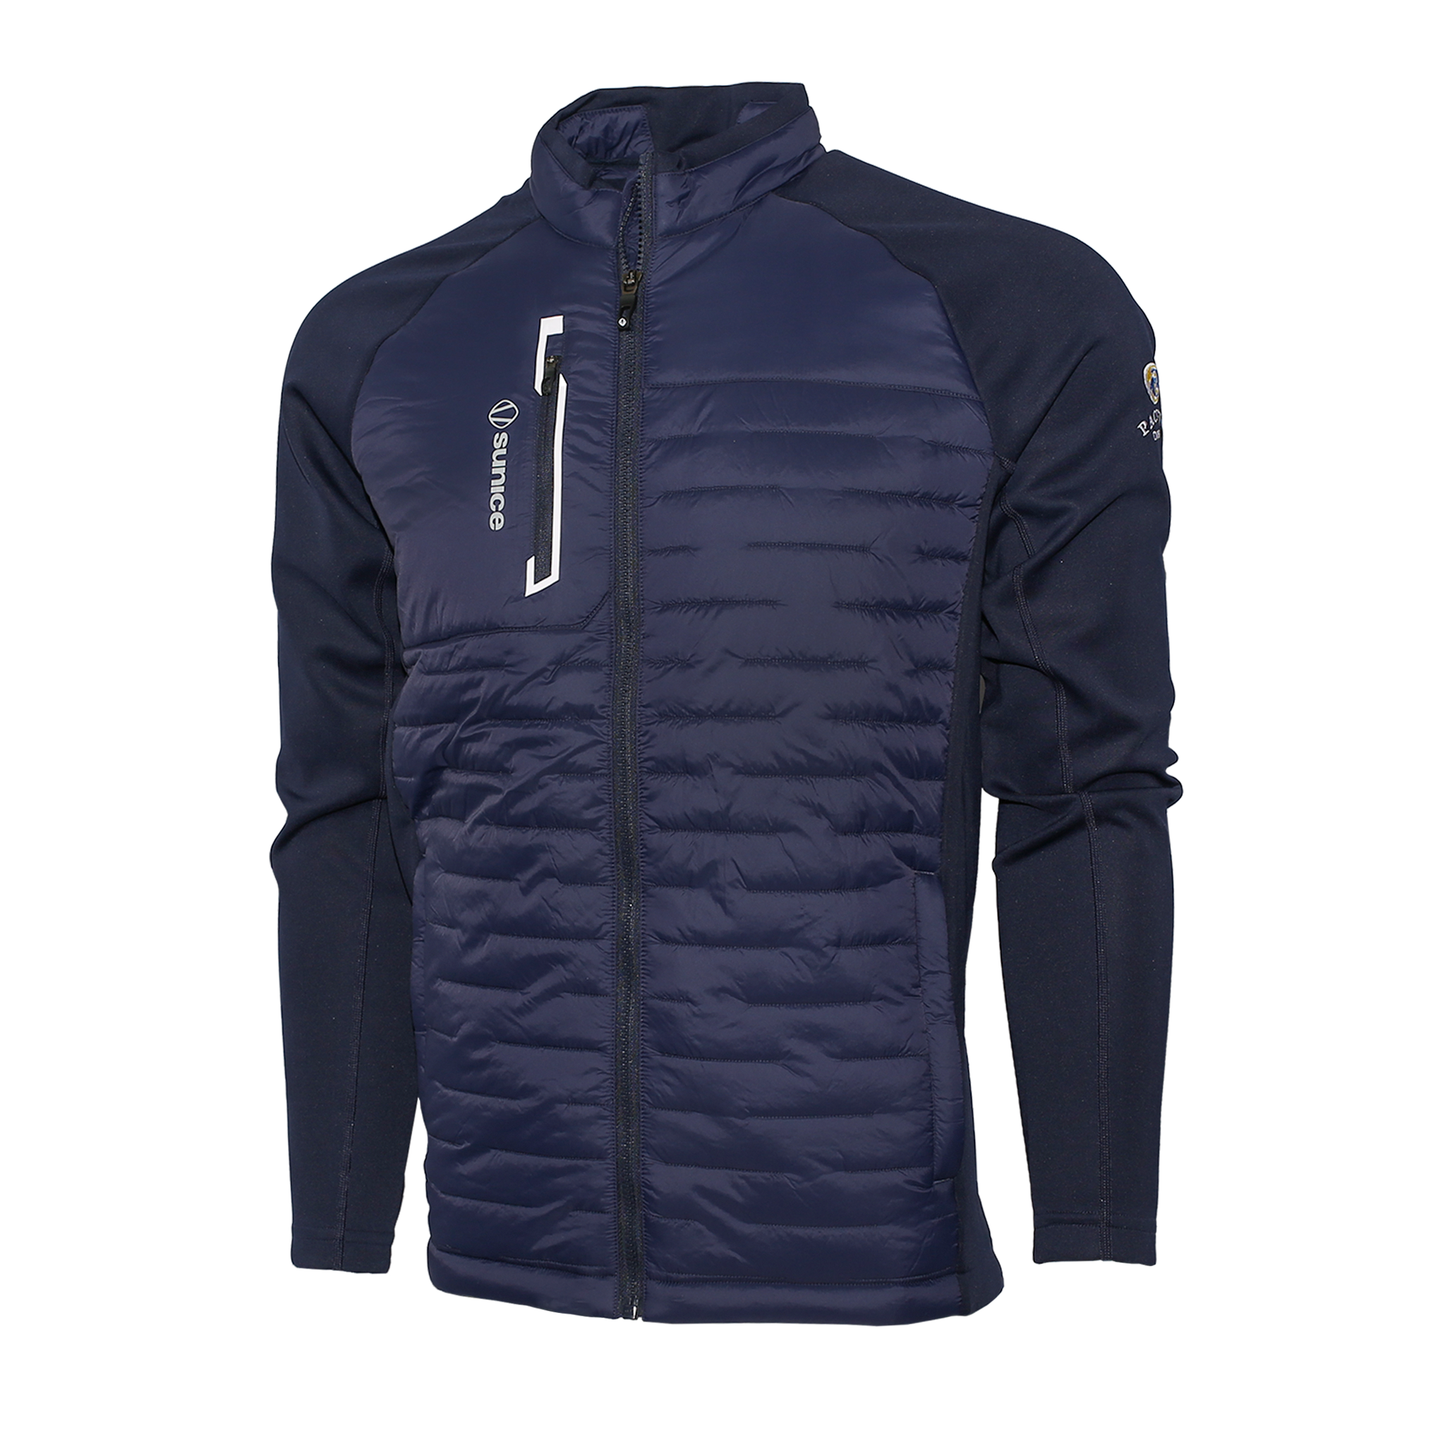 Hamilton Thermal Stretch Jacket - Multiple Courses